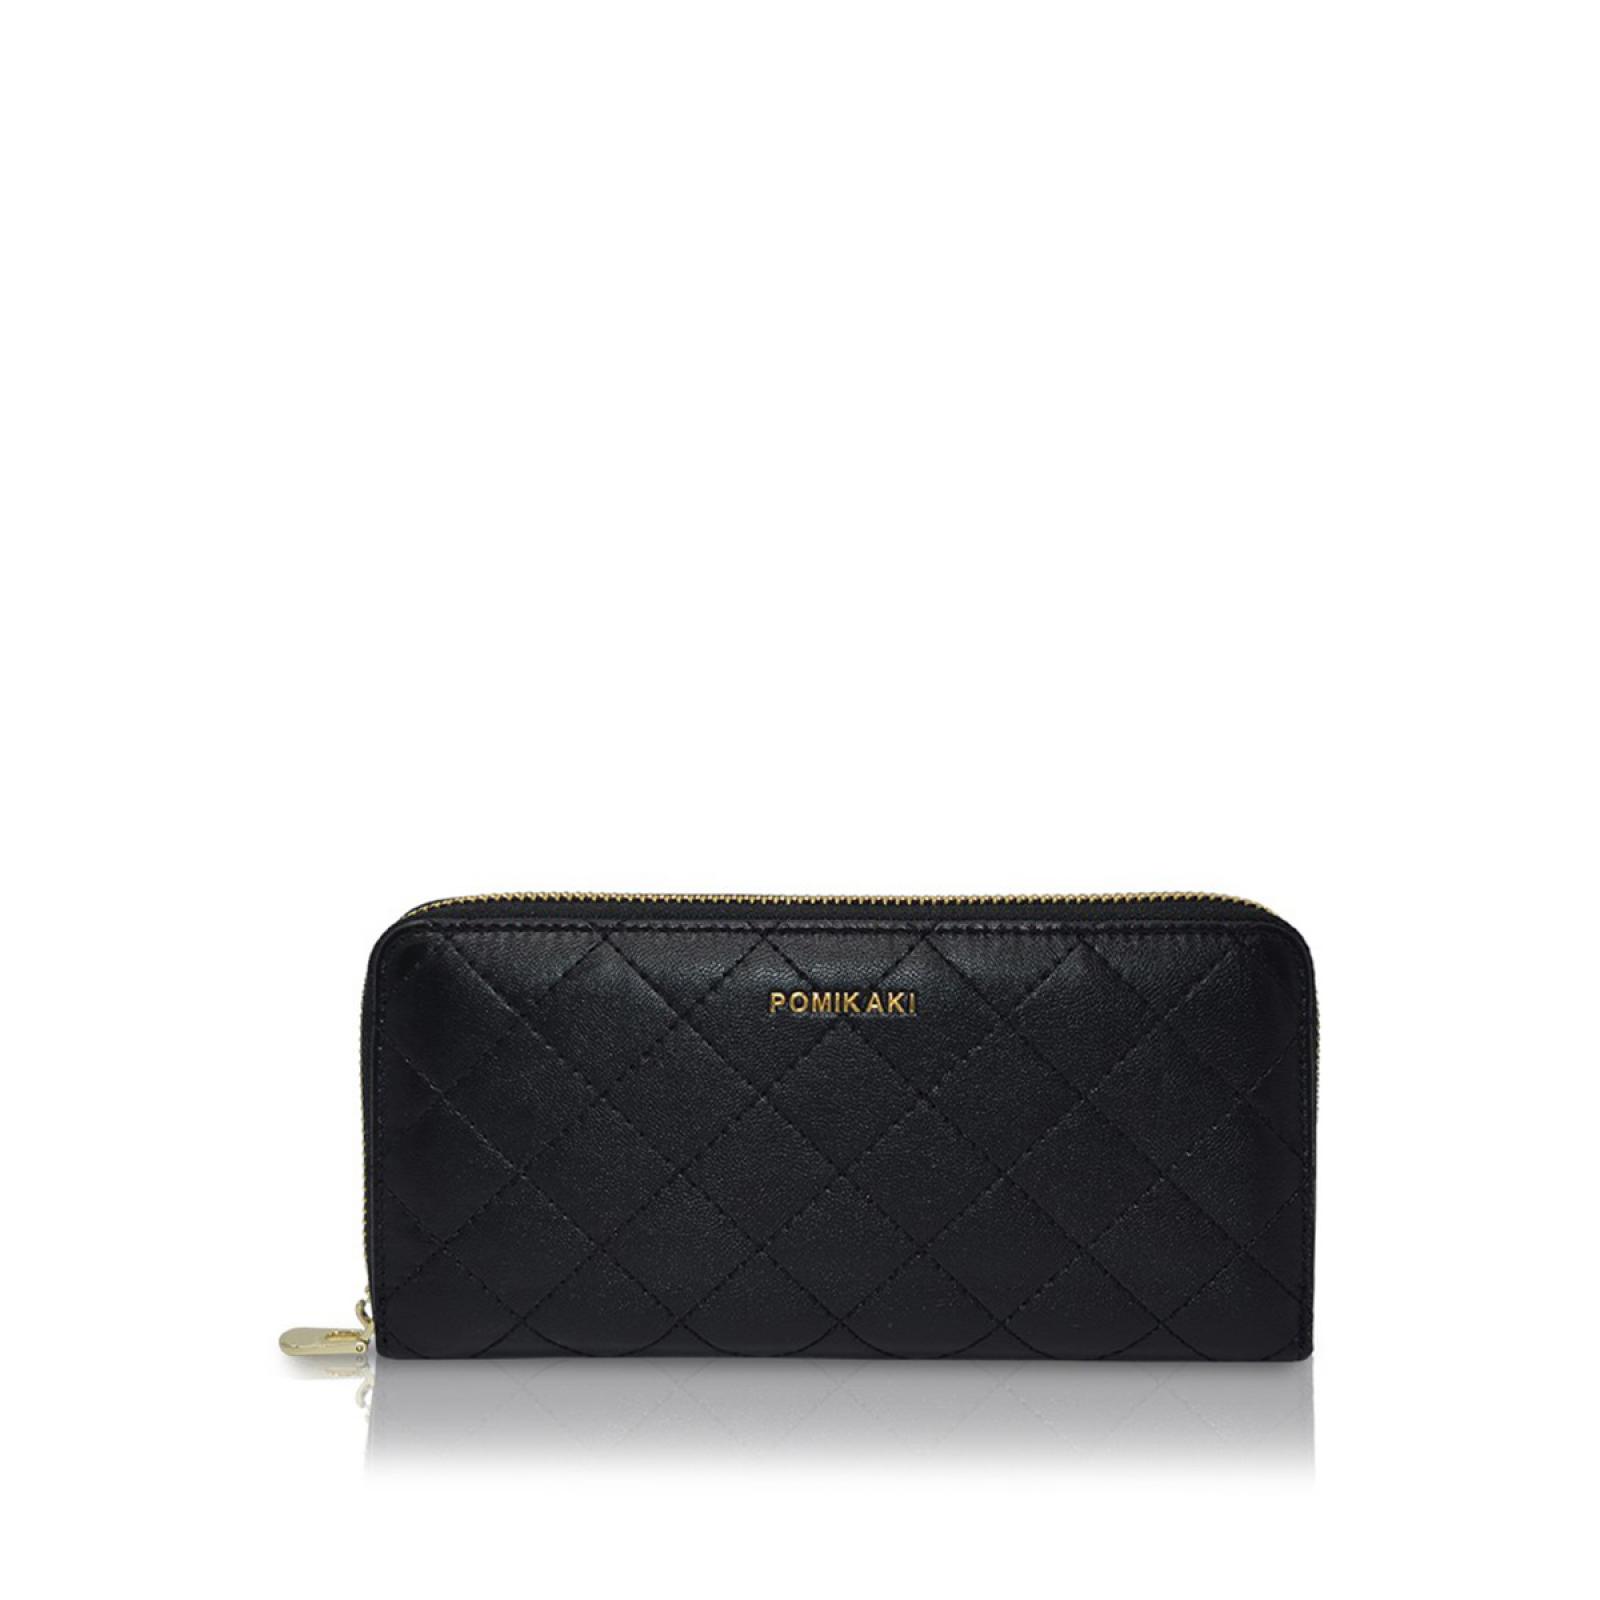 Pomikaki Quilted Louise Large Wallet - 1